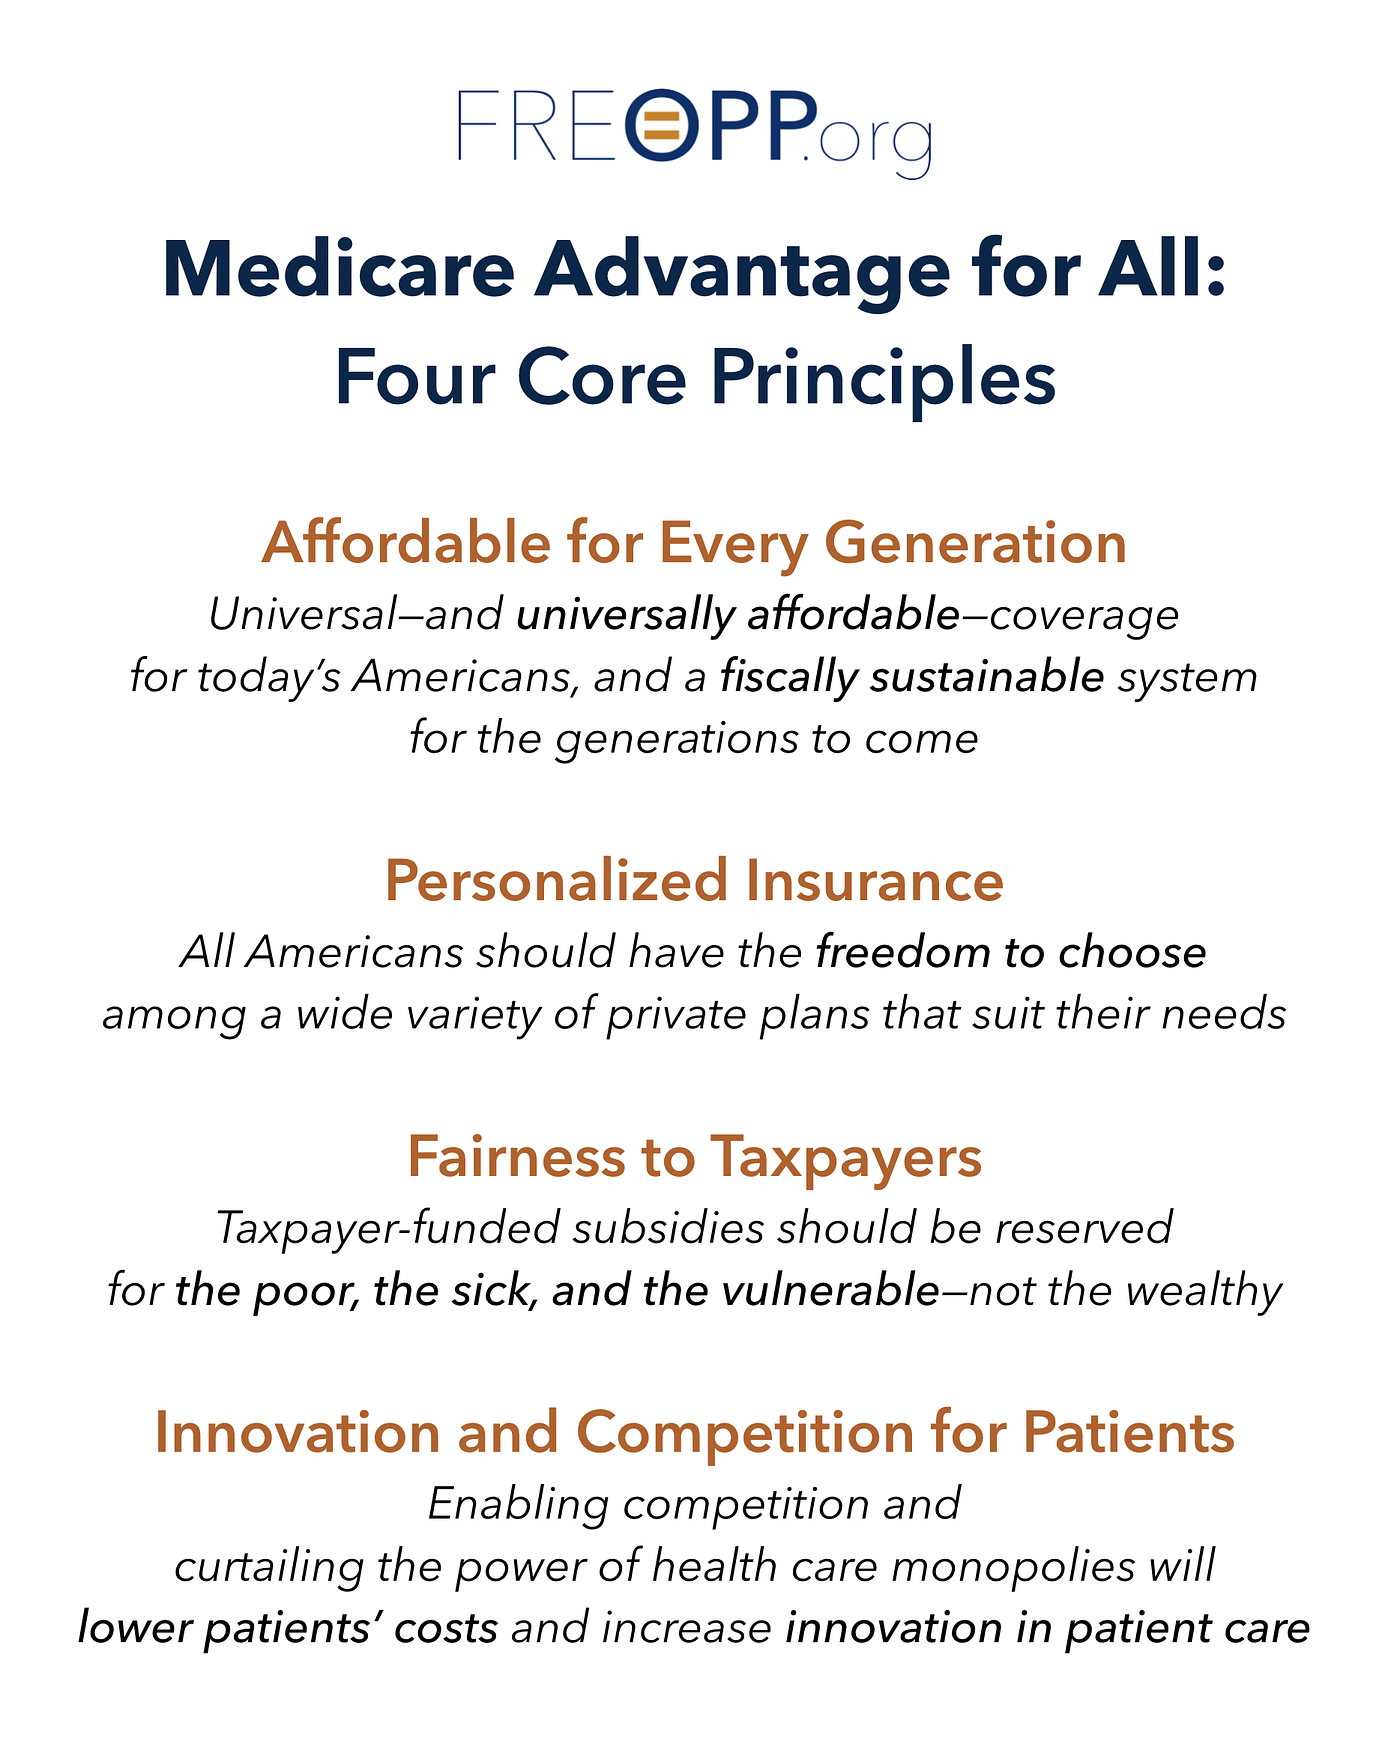 How to Choose the Right Medicare Plan for You